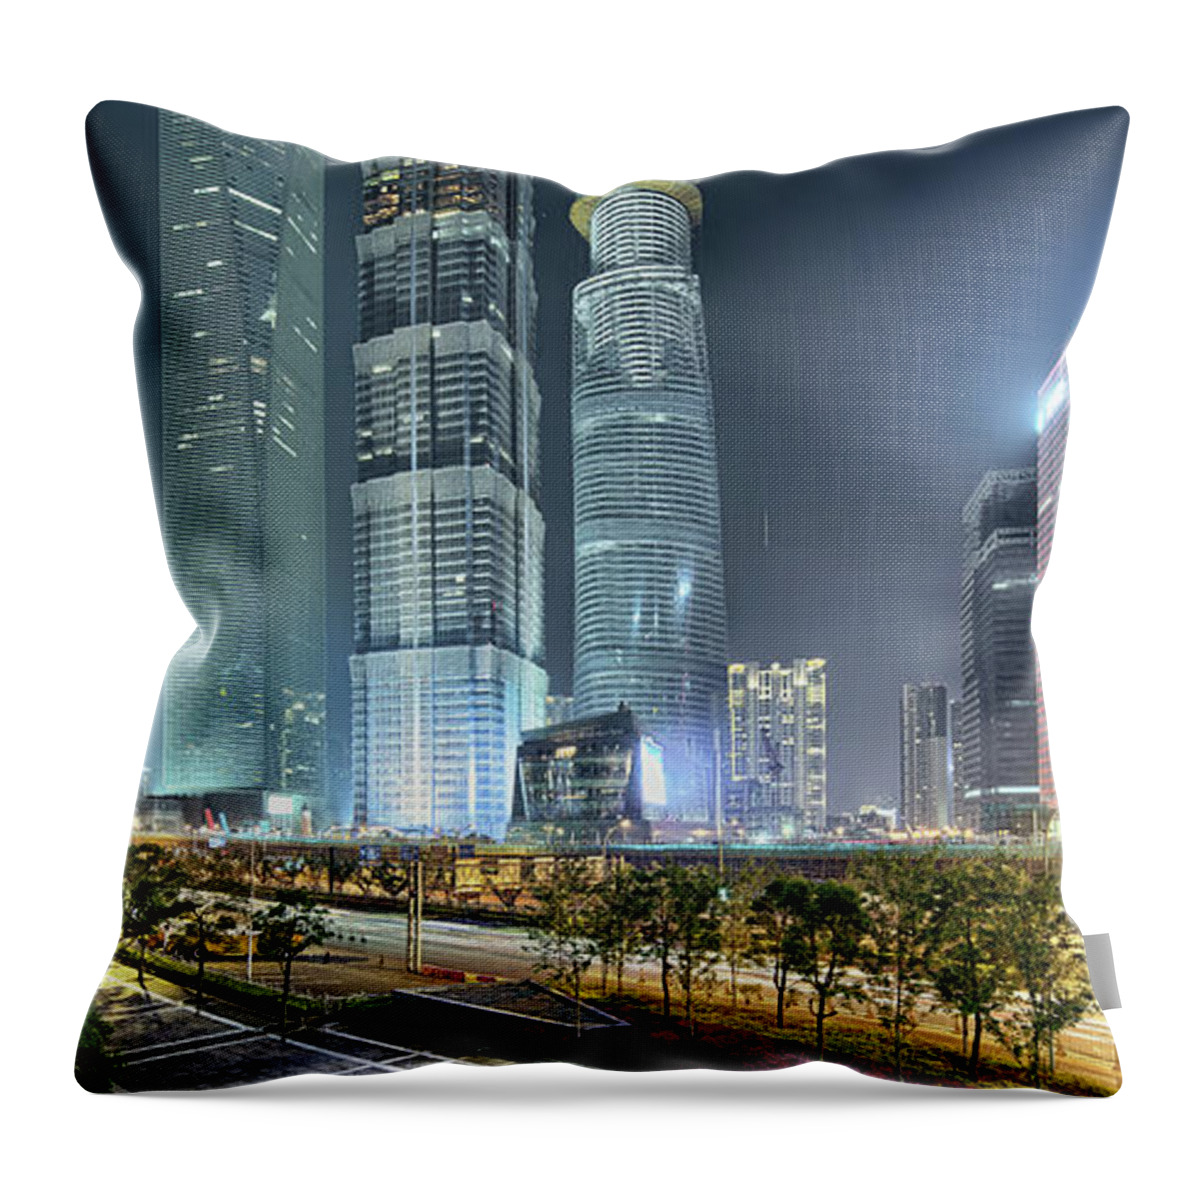 Chinese Culture Throw Pillow featuring the photograph 3 Large Skyscrapers Close Together by Steffen Schnur